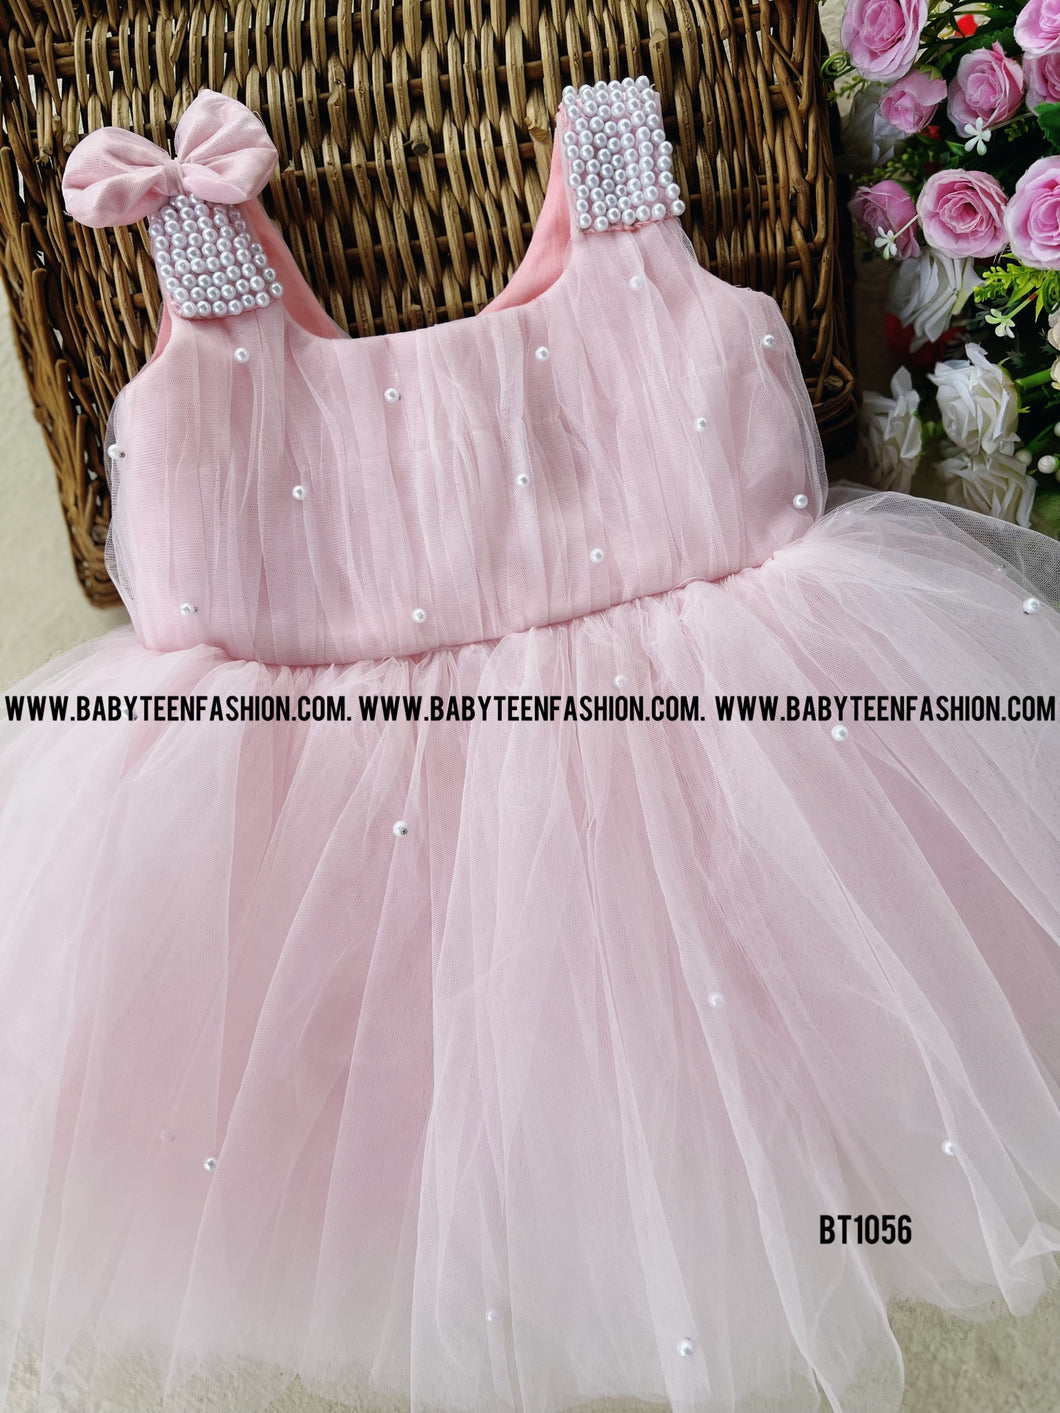 BT1056 Pearl Pink Perfection Dress - Cherished Moments in Chic Style